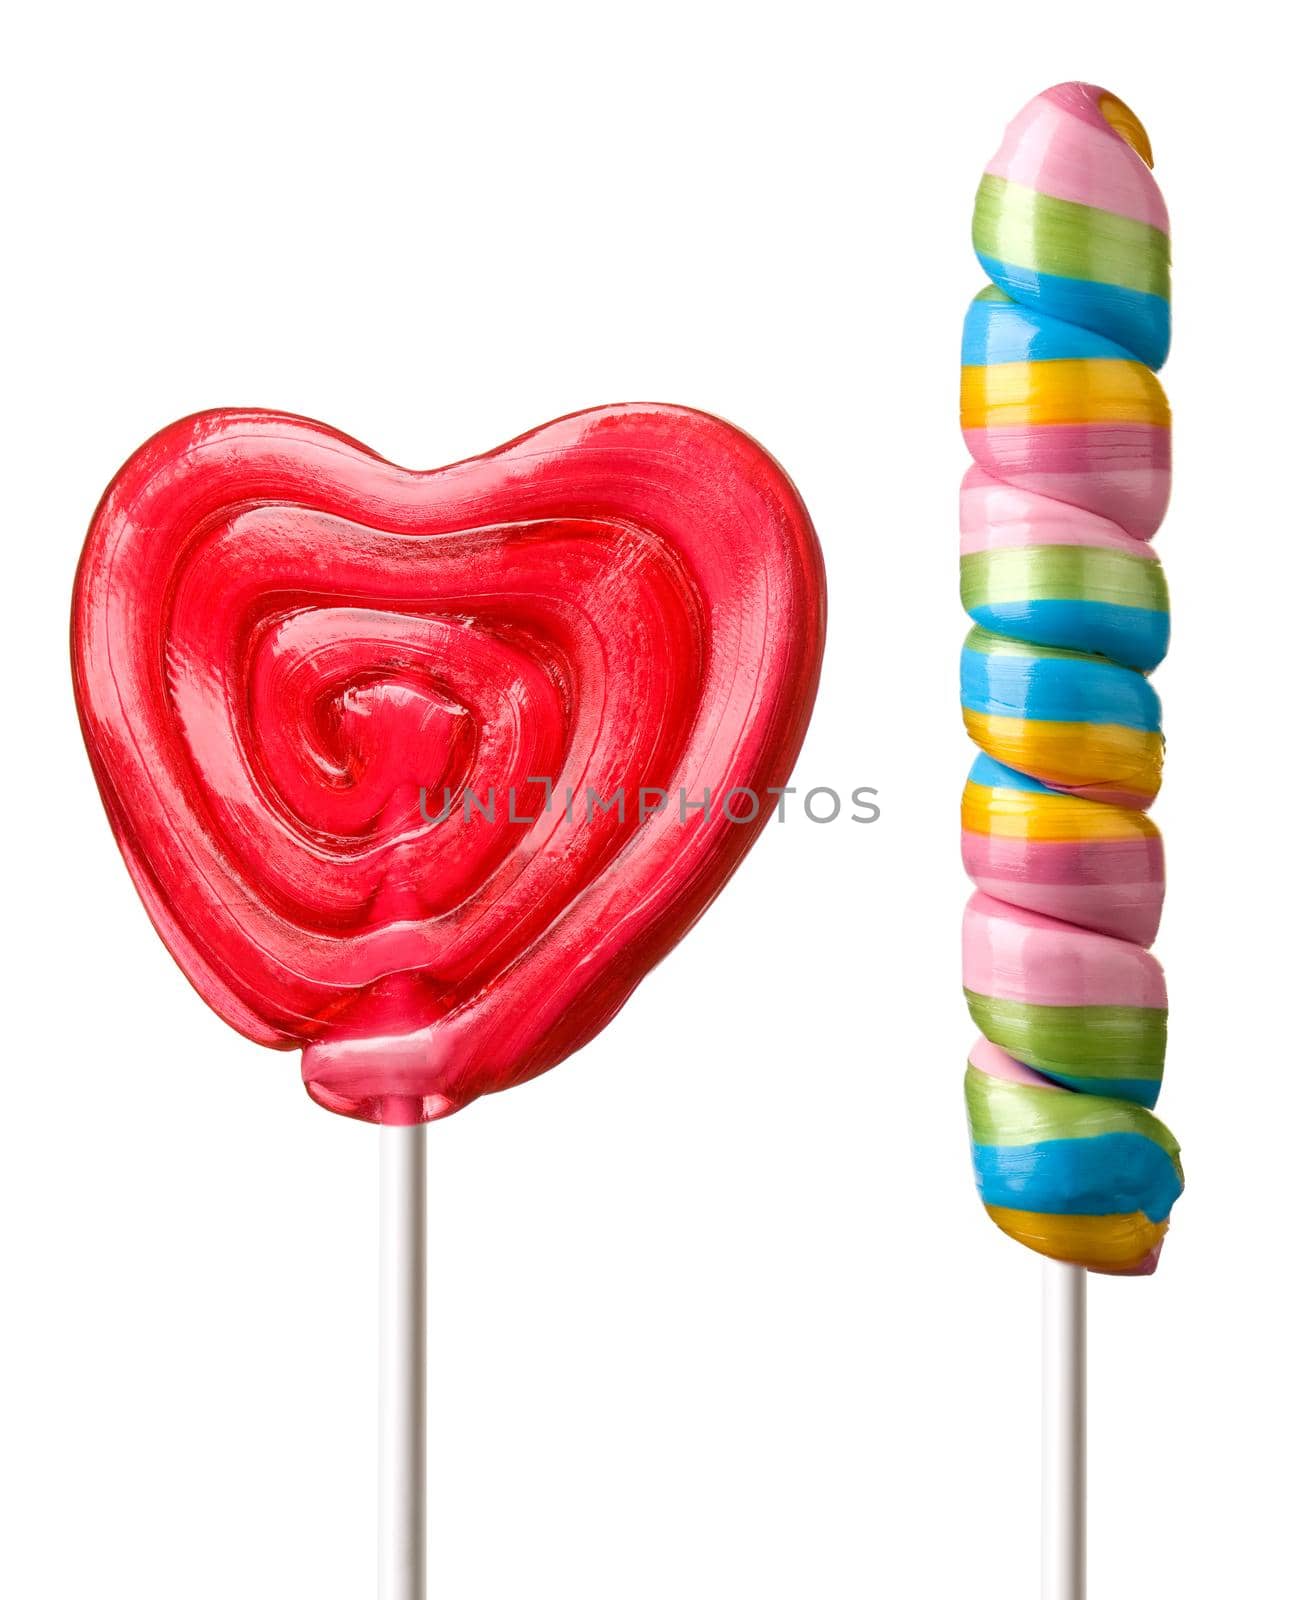 two Colourful lollipop isolated on the white background